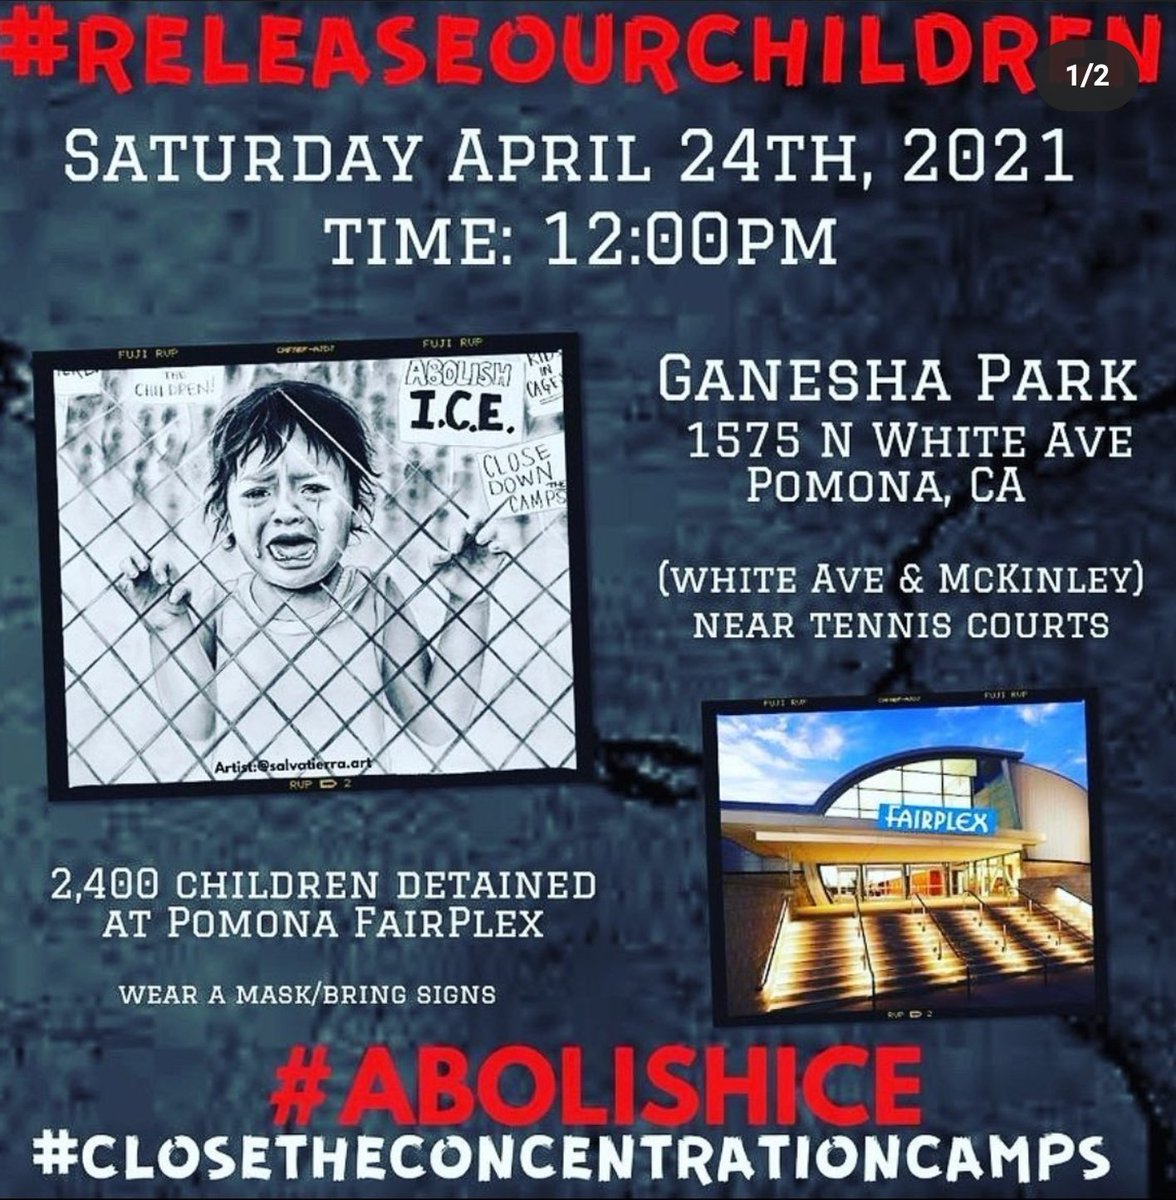 I am here in Pomona for an  #AbolishIce rally. Activists are protesting the detainment of unaccompanied minors at the Pomona Fairplex. 2,400 children are being held at the facility.